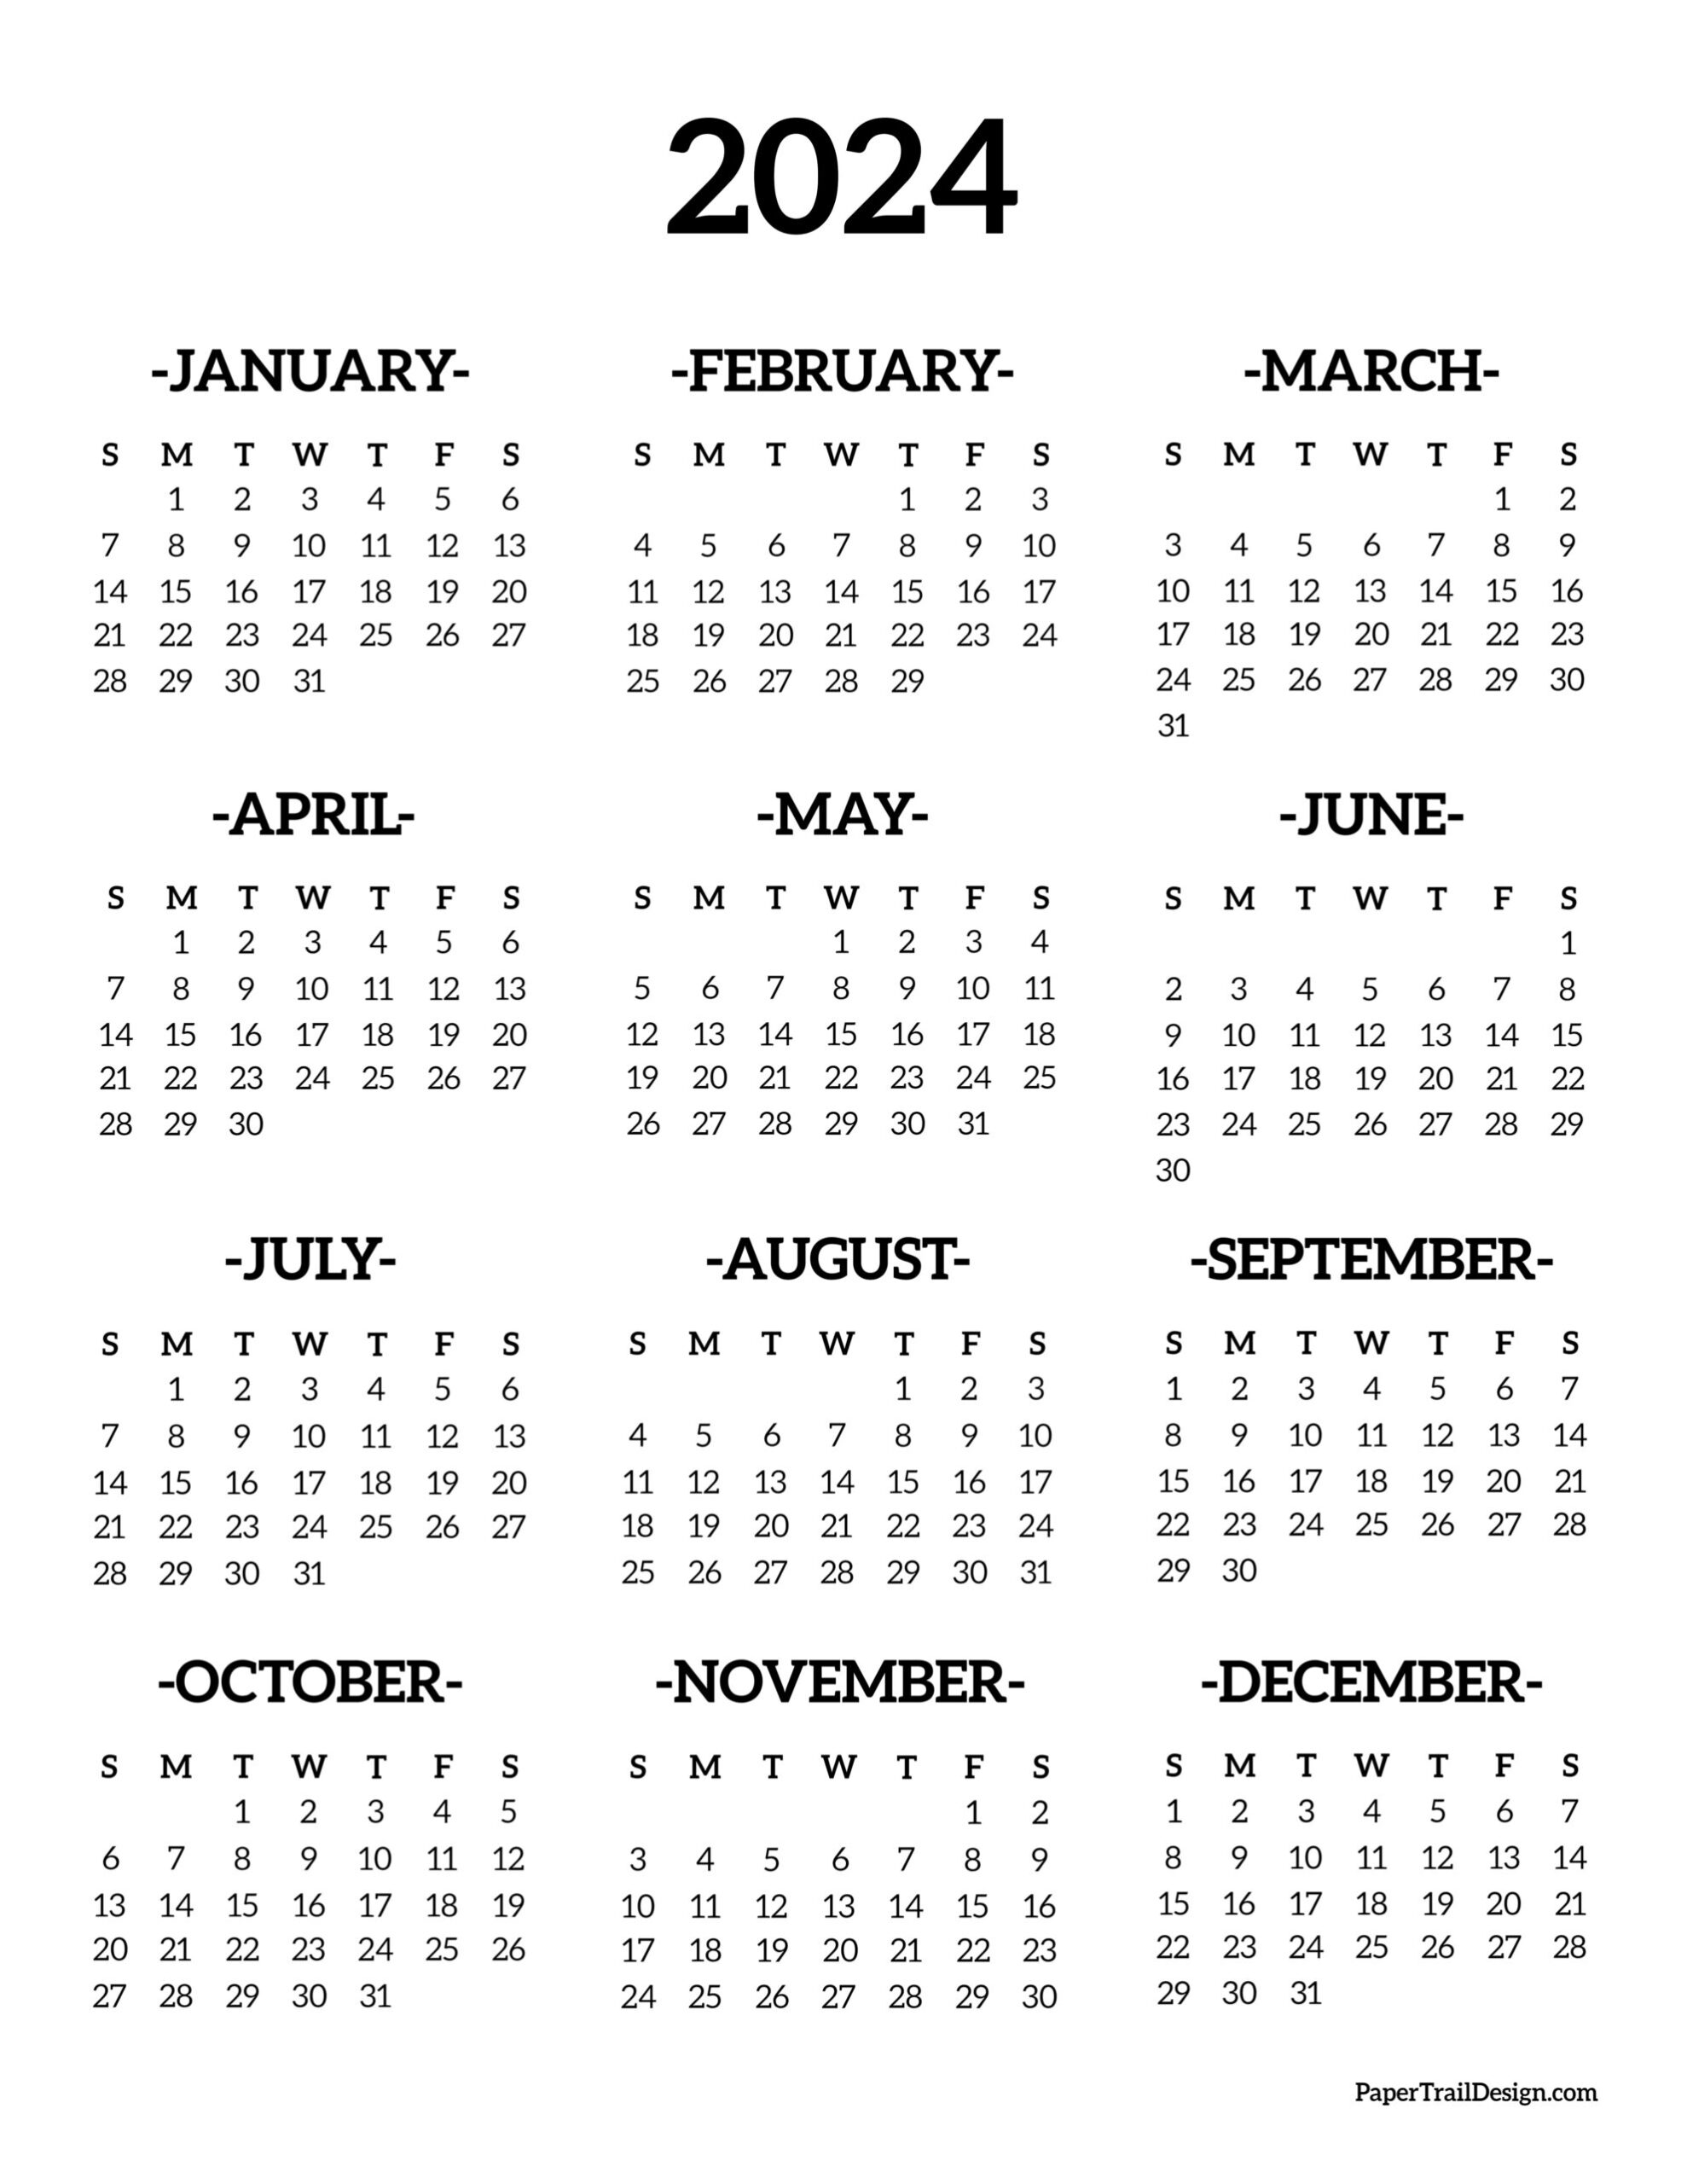 Calendar 2024 Printable One Page - Paper Trail Design for Full Page Printable 2024 Calendar